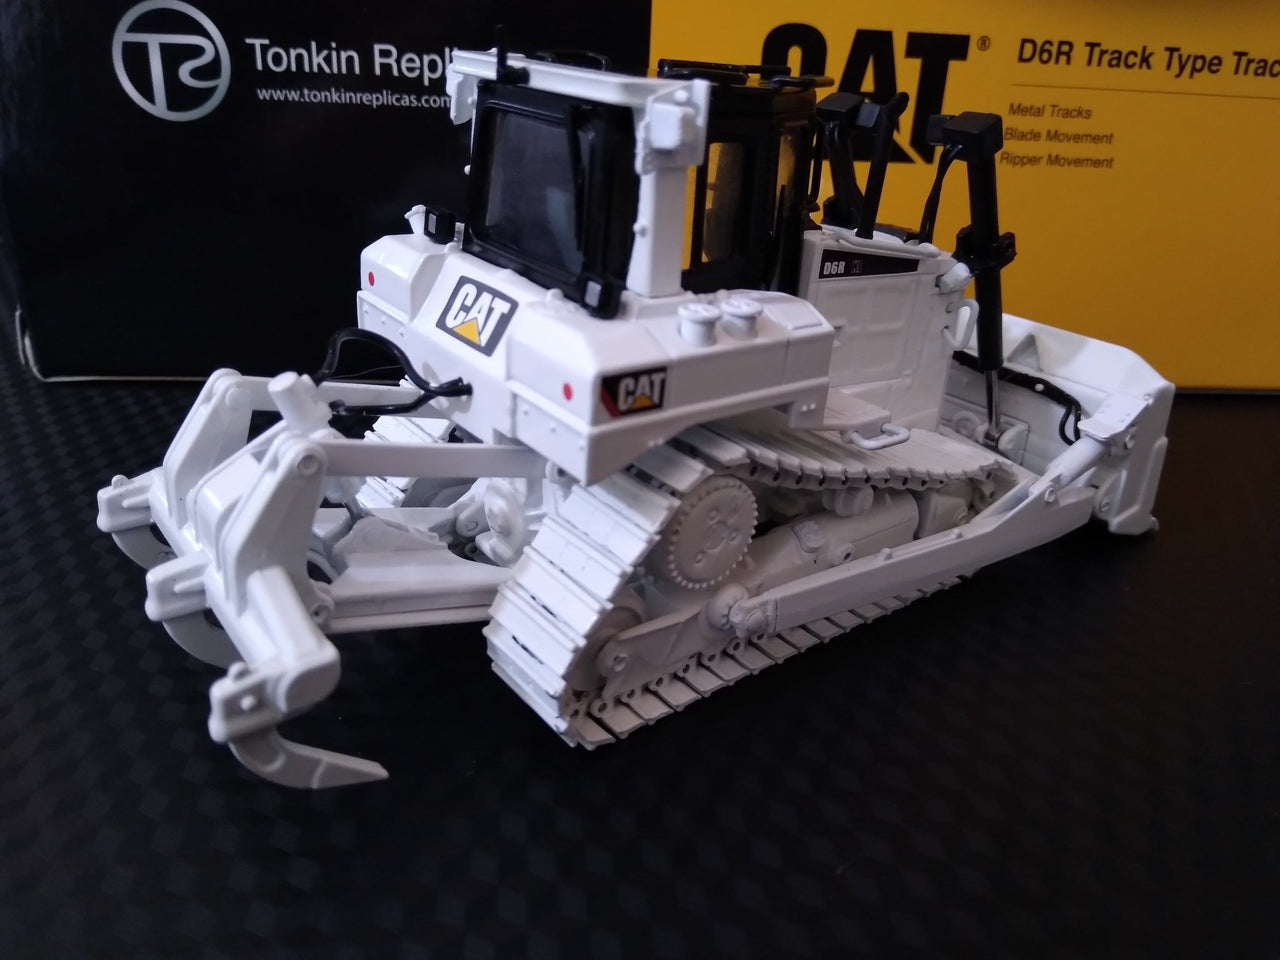 60001-01 Caterpillar D6R Crawler Tractor Scale 1:50 (Discontinued Model)